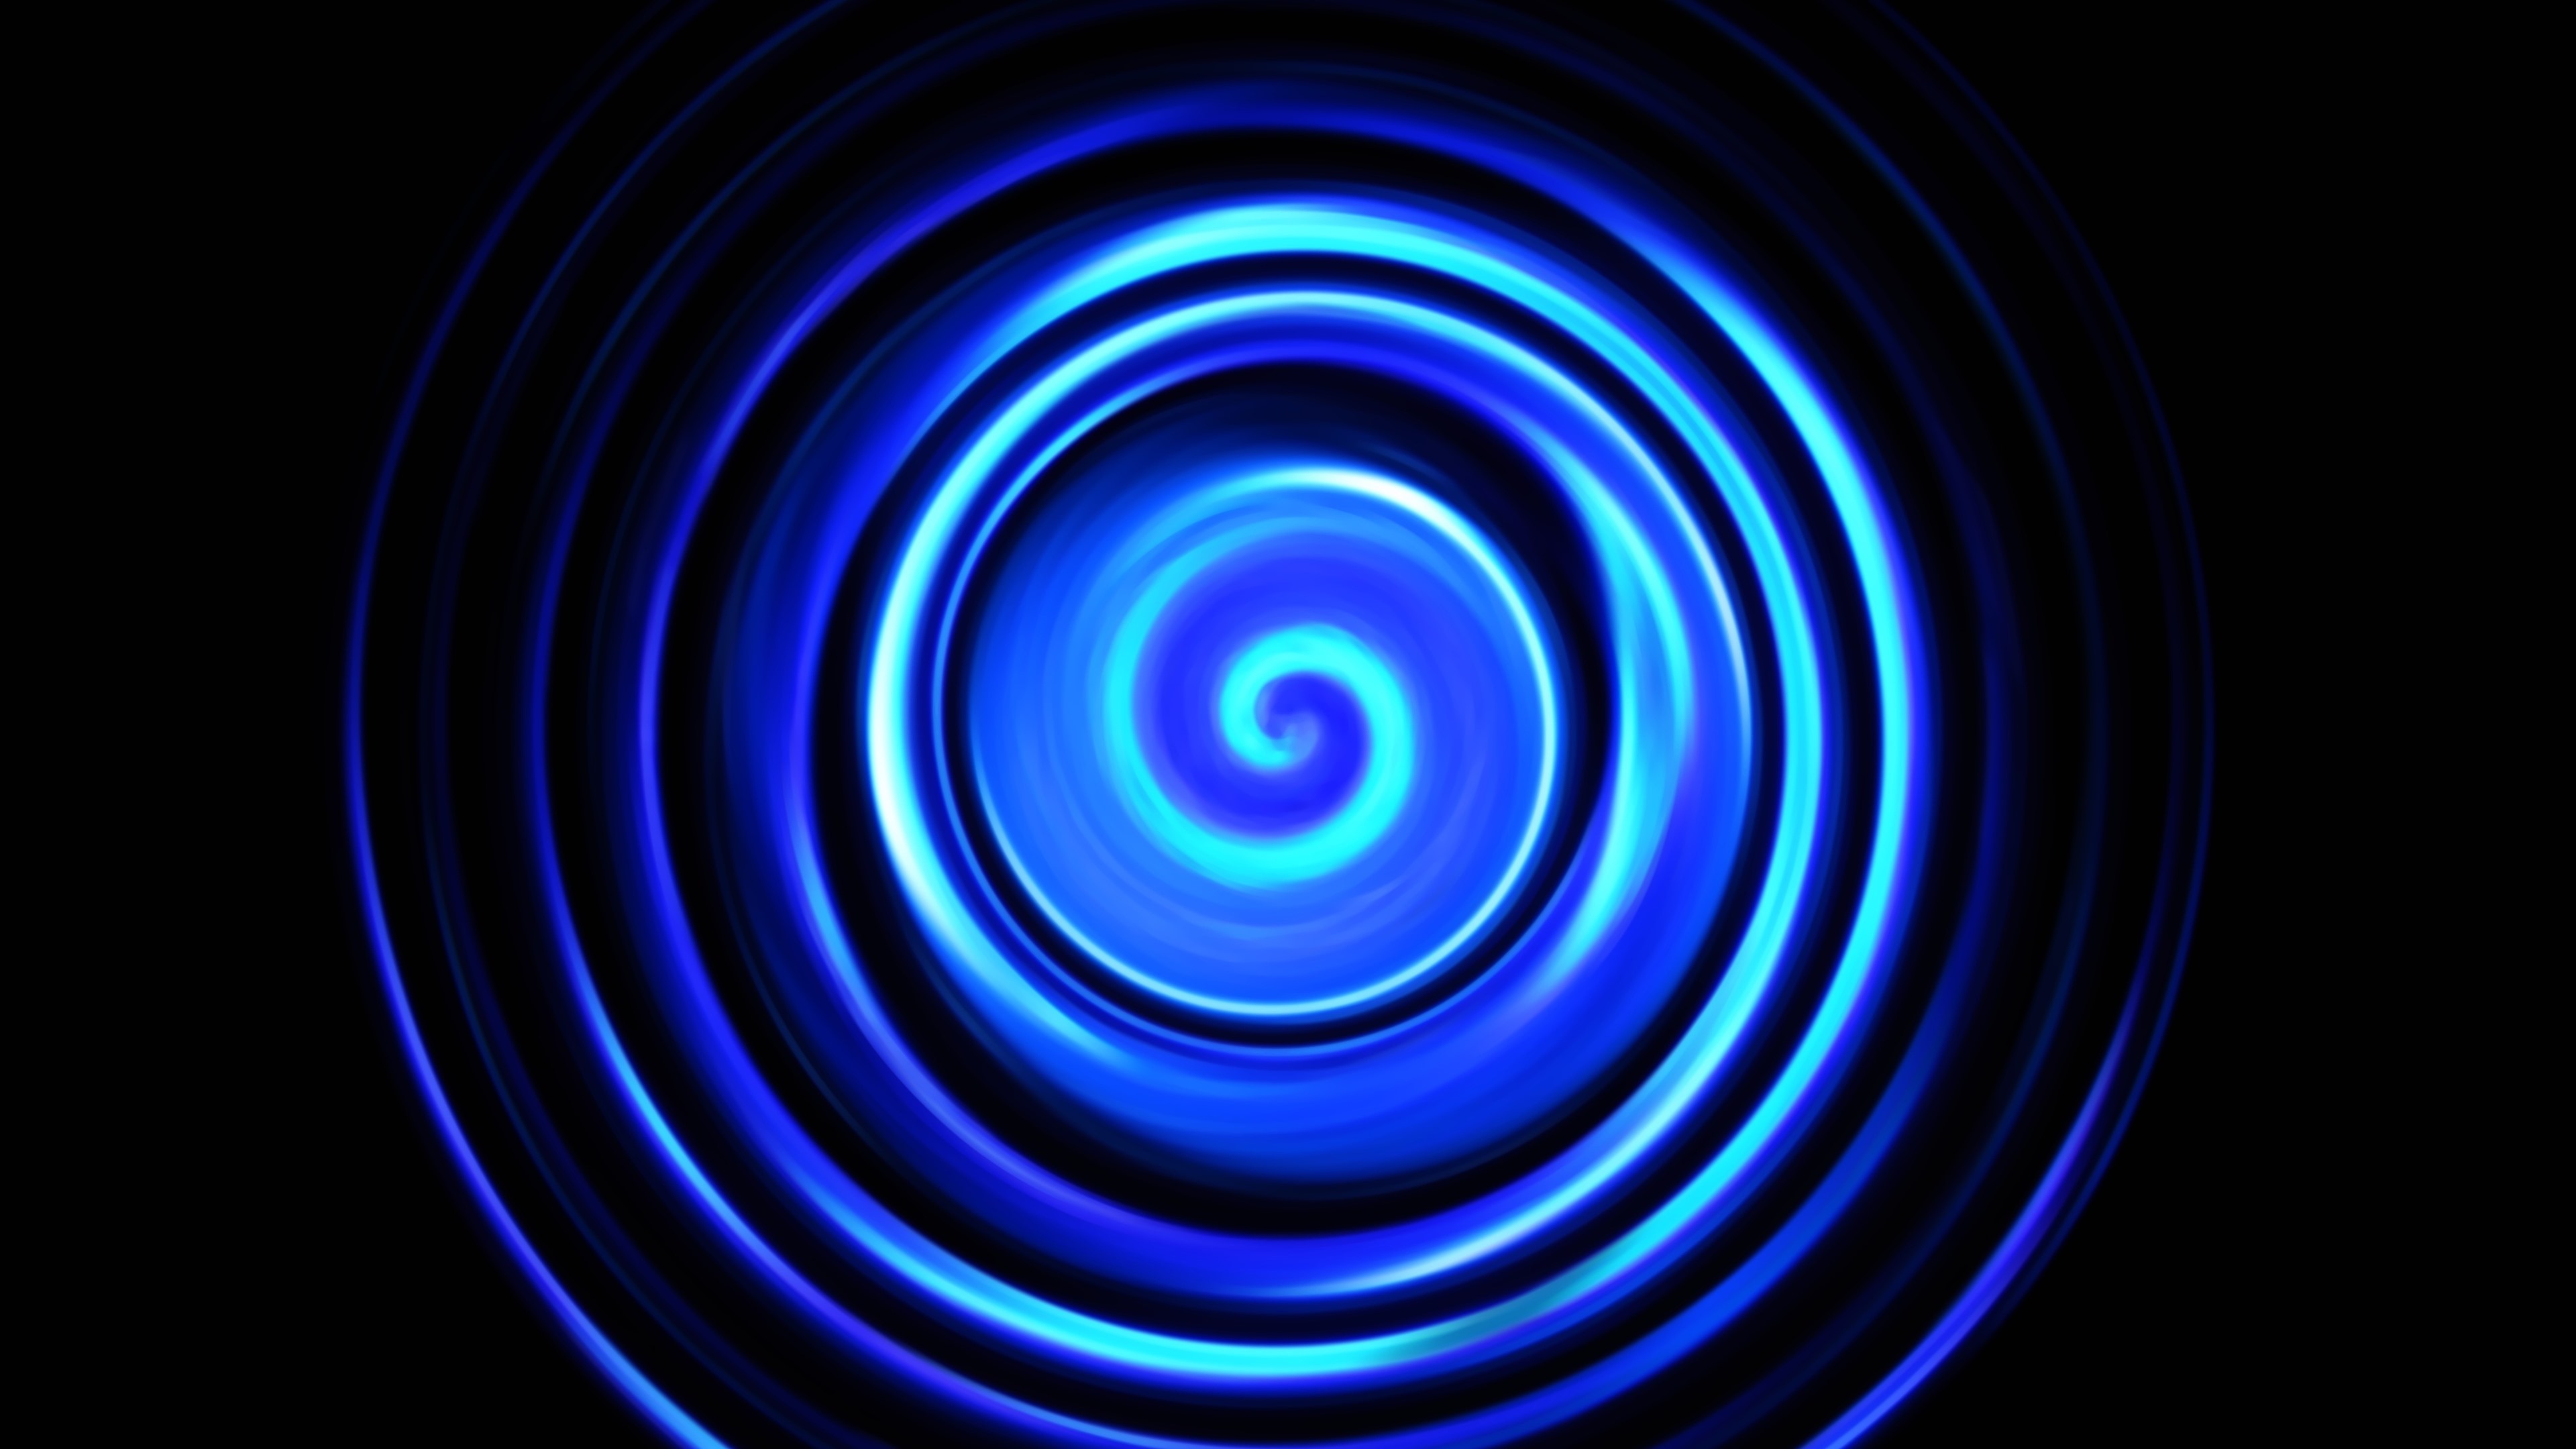 Blue abstract spiral black background x iphone proxs max wallpaper background picture image